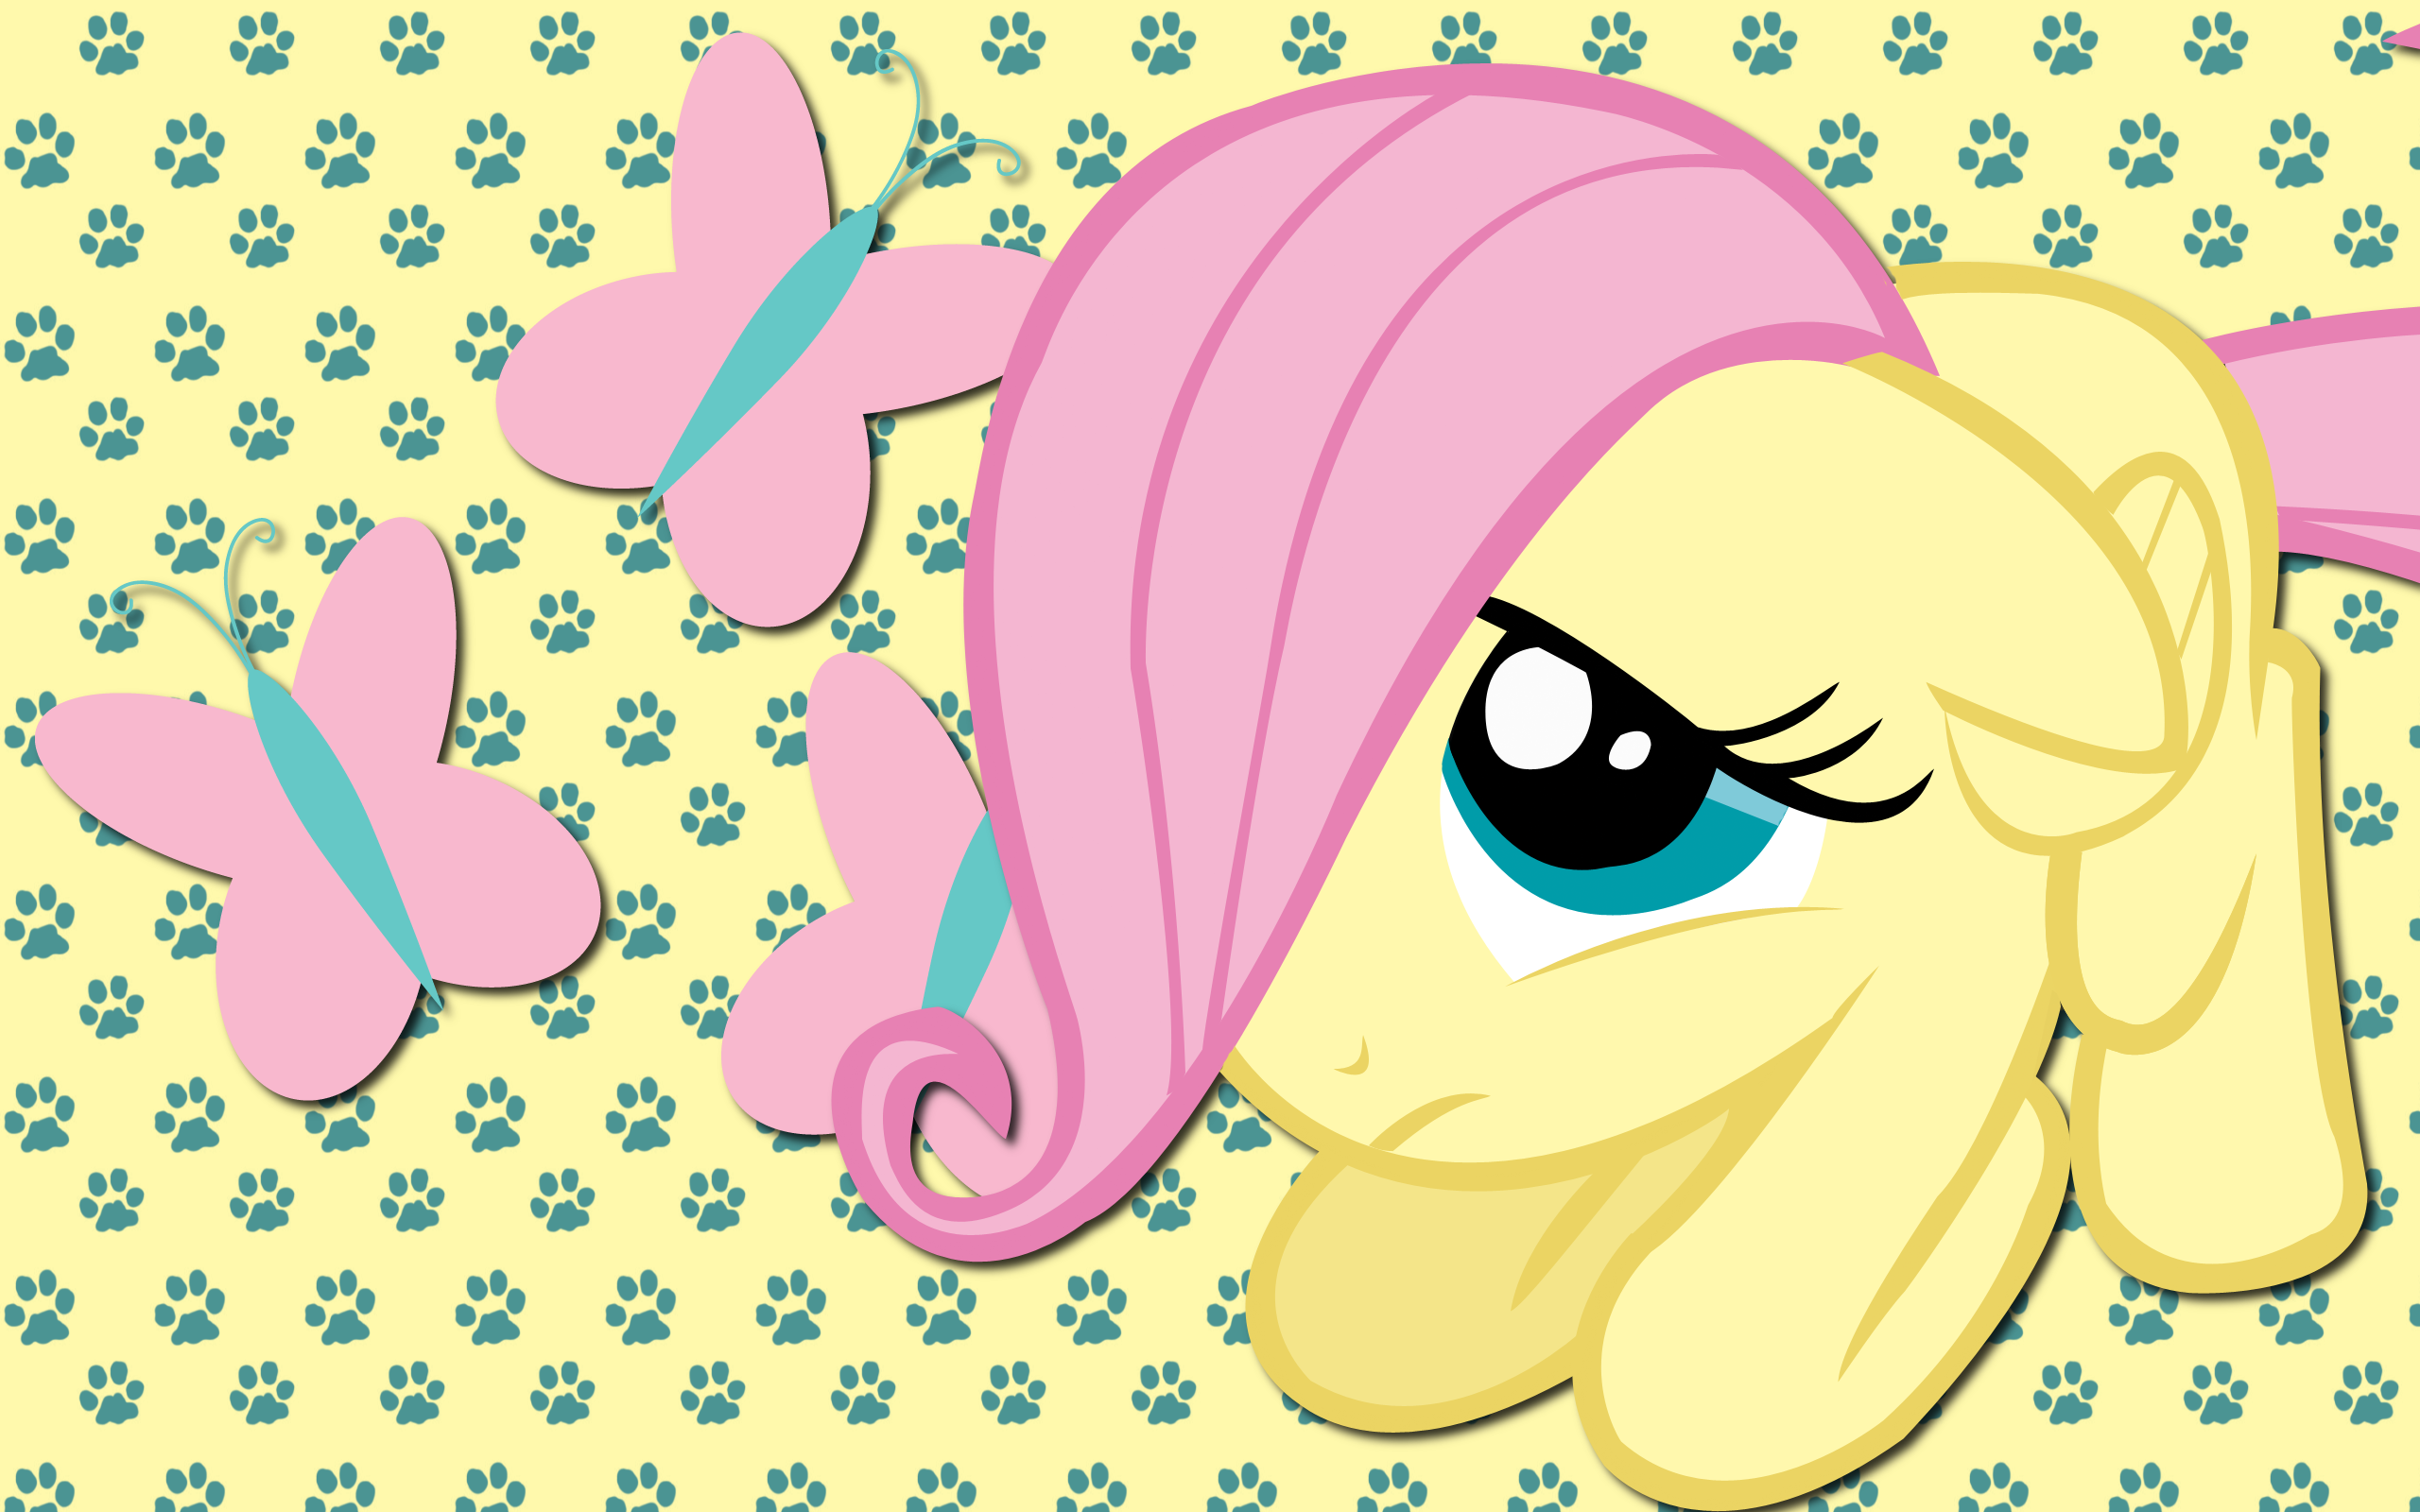 Fluttershy wallpaper 9 by AliceHumanSacrifice0, BlowingBomb and ooklah